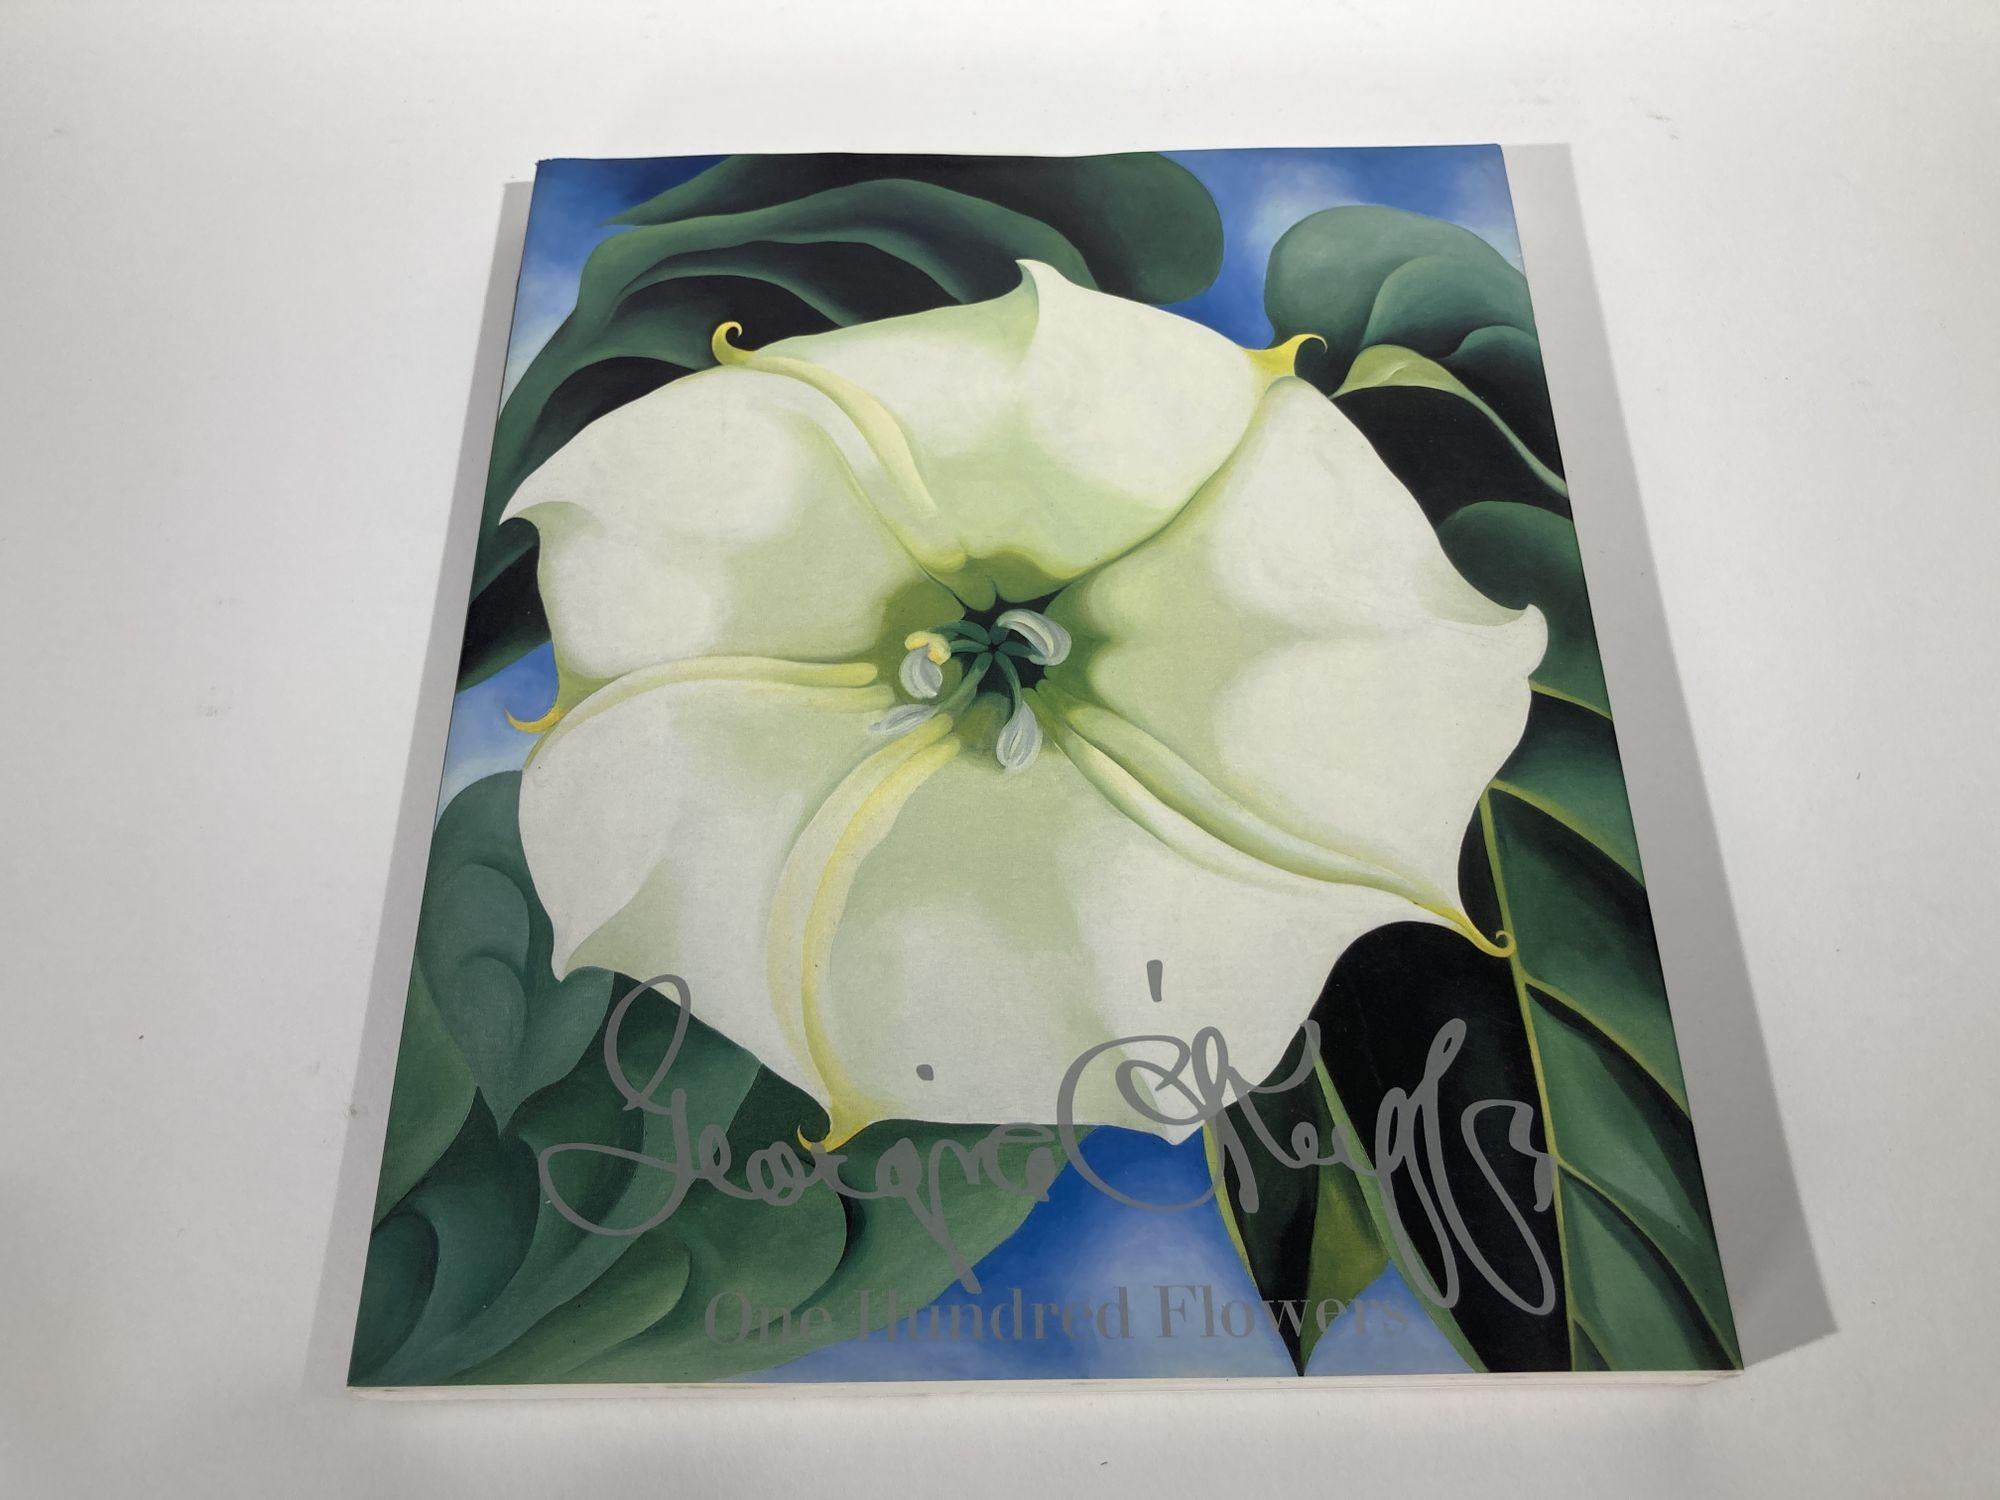 Expressionist Georgia O'Keeffe One Hundred Flowers Coffee Table Hardcover Art Book 1987